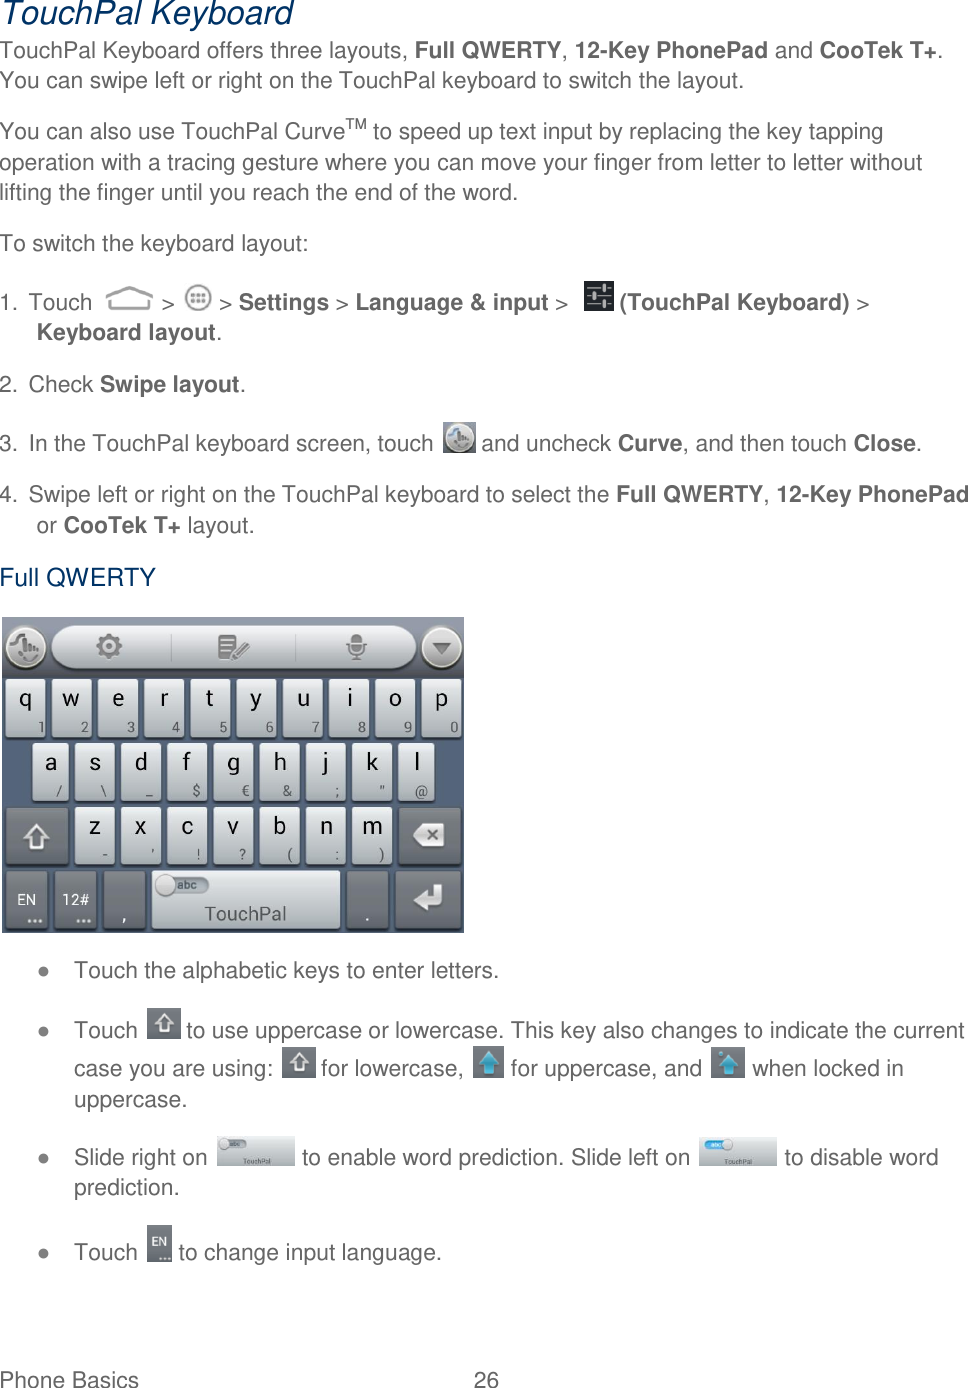 Phone Basics  26   TouchPal Keyboard TouchPal Keyboard offers three layouts, Full QWERTY, 12-Key PhonePad and CooTek T+. You can swipe left or right on the TouchPal keyboard to switch the layout.  You can also use TouchPal CurveTM to speed up text input by replacing the key tapping operation with a tracing gesture where you can move your finger from letter to letter without lifting the finger until you reach the end of the word. To switch the keyboard layout: 1.  Touch   &gt;   &gt; Settings &gt; Language &amp; input &gt;    (TouchPal Keyboard) &gt; Keyboard layout. 2.  Check Swipe layout. 3.  In the TouchPal keyboard screen, touch   and uncheck Curve, and then touch Close. 4.  Swipe left or right on the TouchPal keyboard to select the Full QWERTY, 12-Key PhonePad or CooTek T+ layout. Full QWERTY  ● Touch the alphabetic keys to enter letters. ● Touch   to use uppercase or lowercase. This key also changes to indicate the current case you are using:   for lowercase,   for uppercase, and   when locked in uppercase. ● Slide right on   to enable word prediction. Slide left on   to disable word prediction. ● Touch   to change input language. 